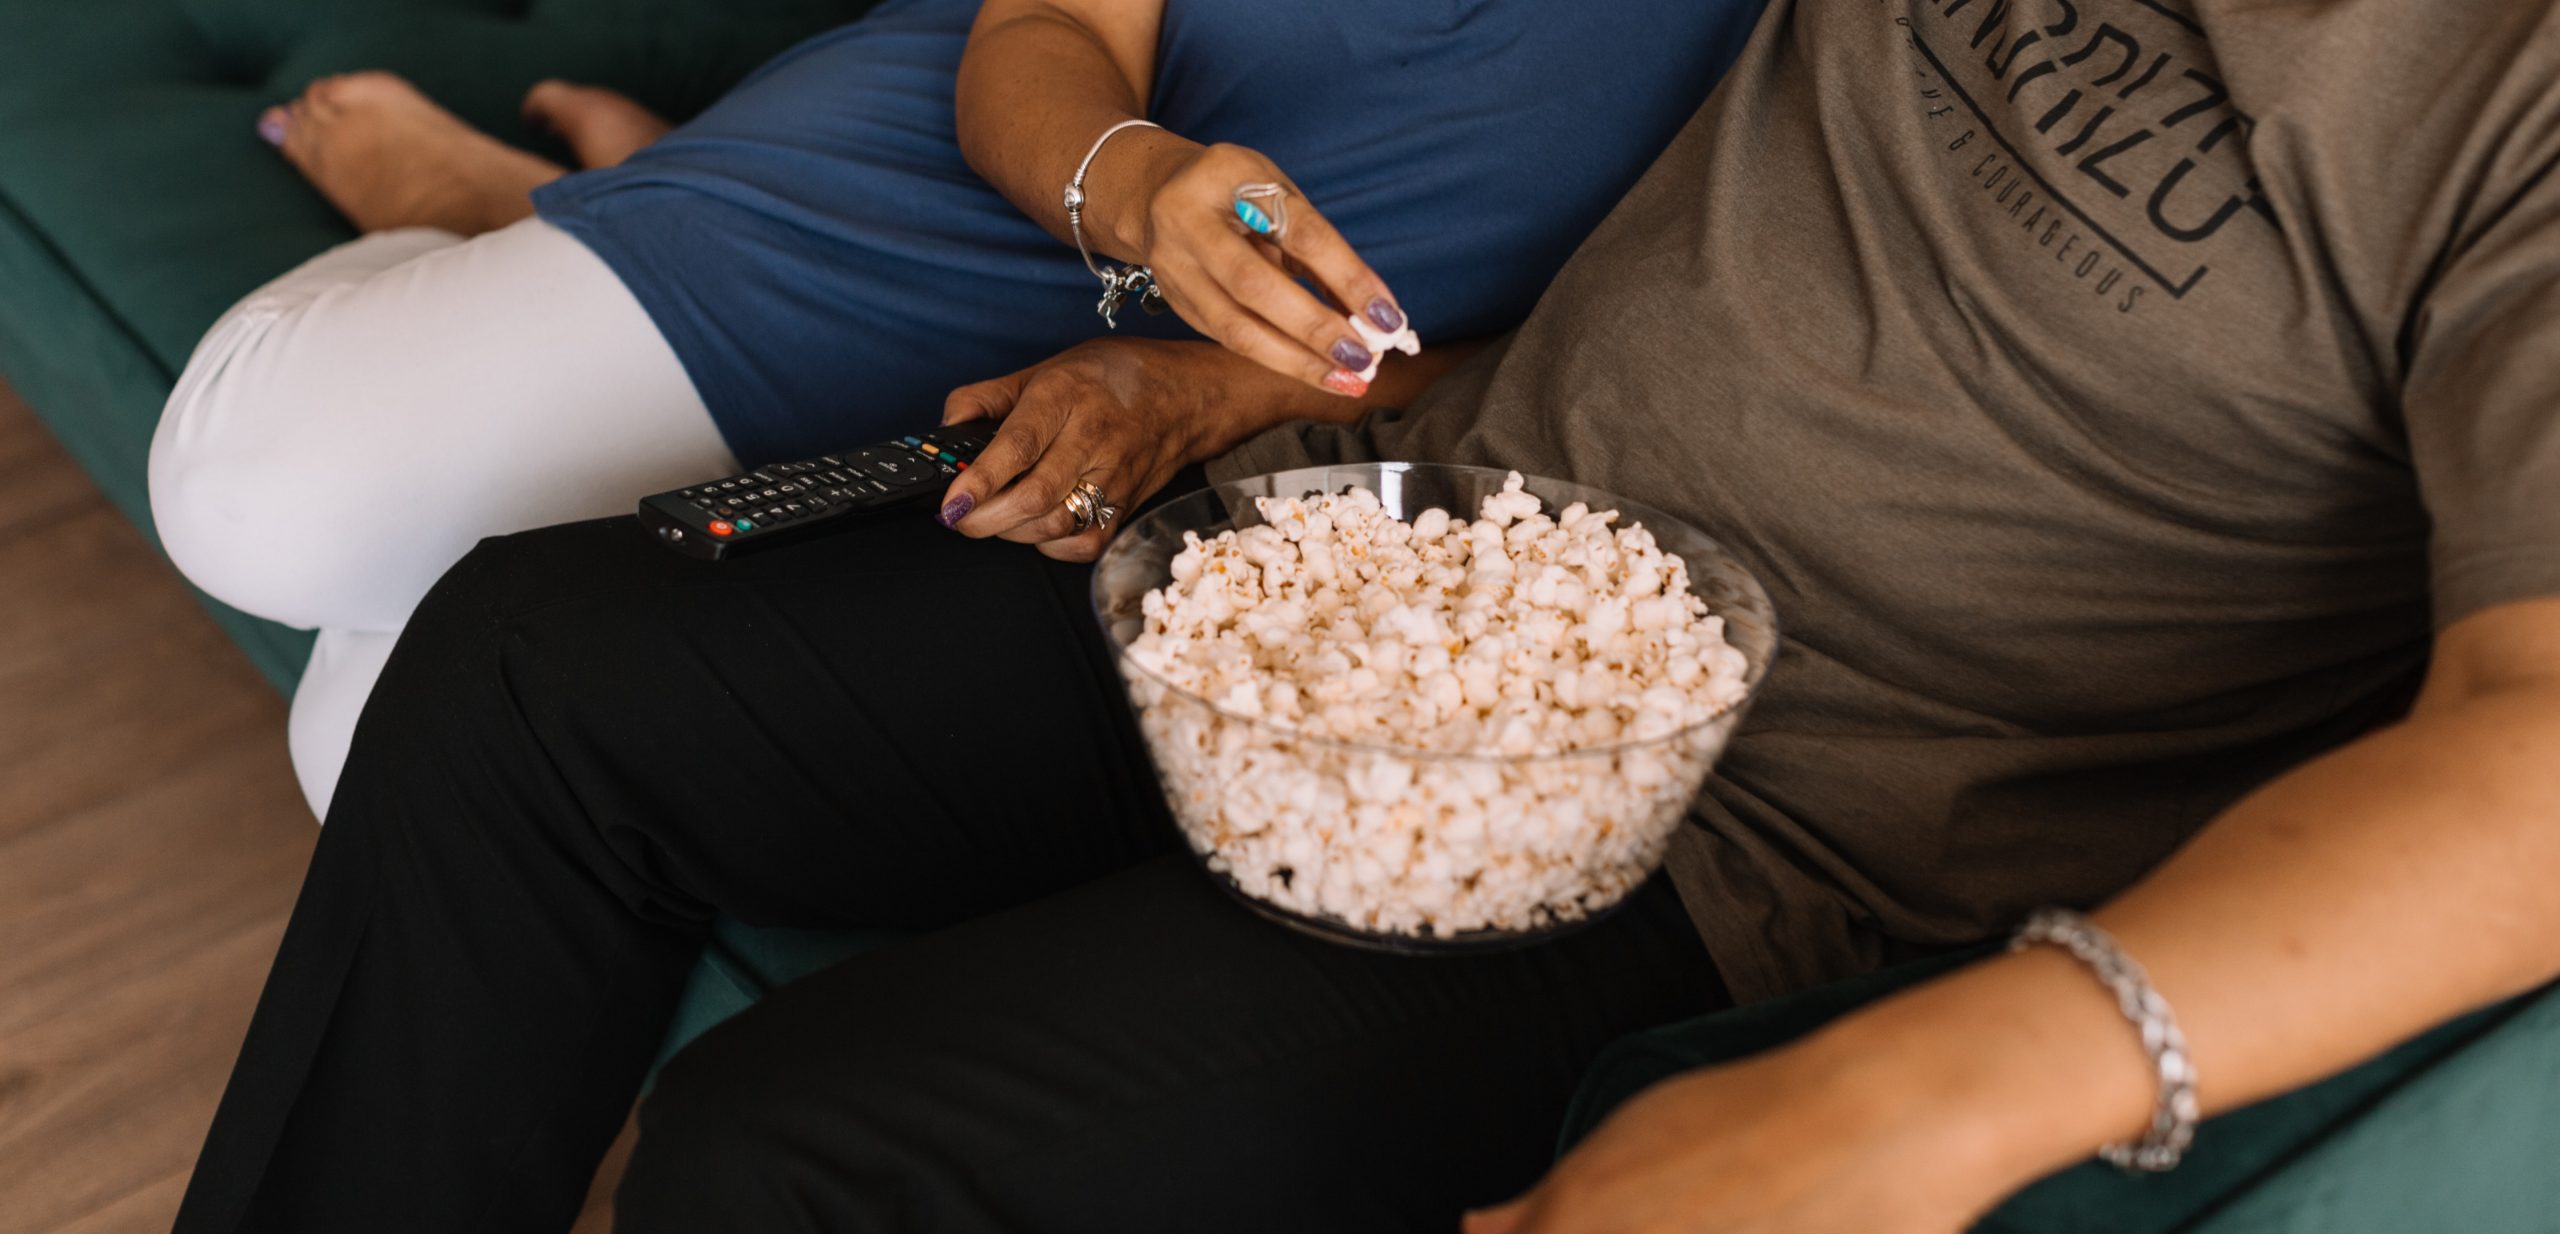 a couple sitting together on the couch watching a movie, with a bowl of popcorn